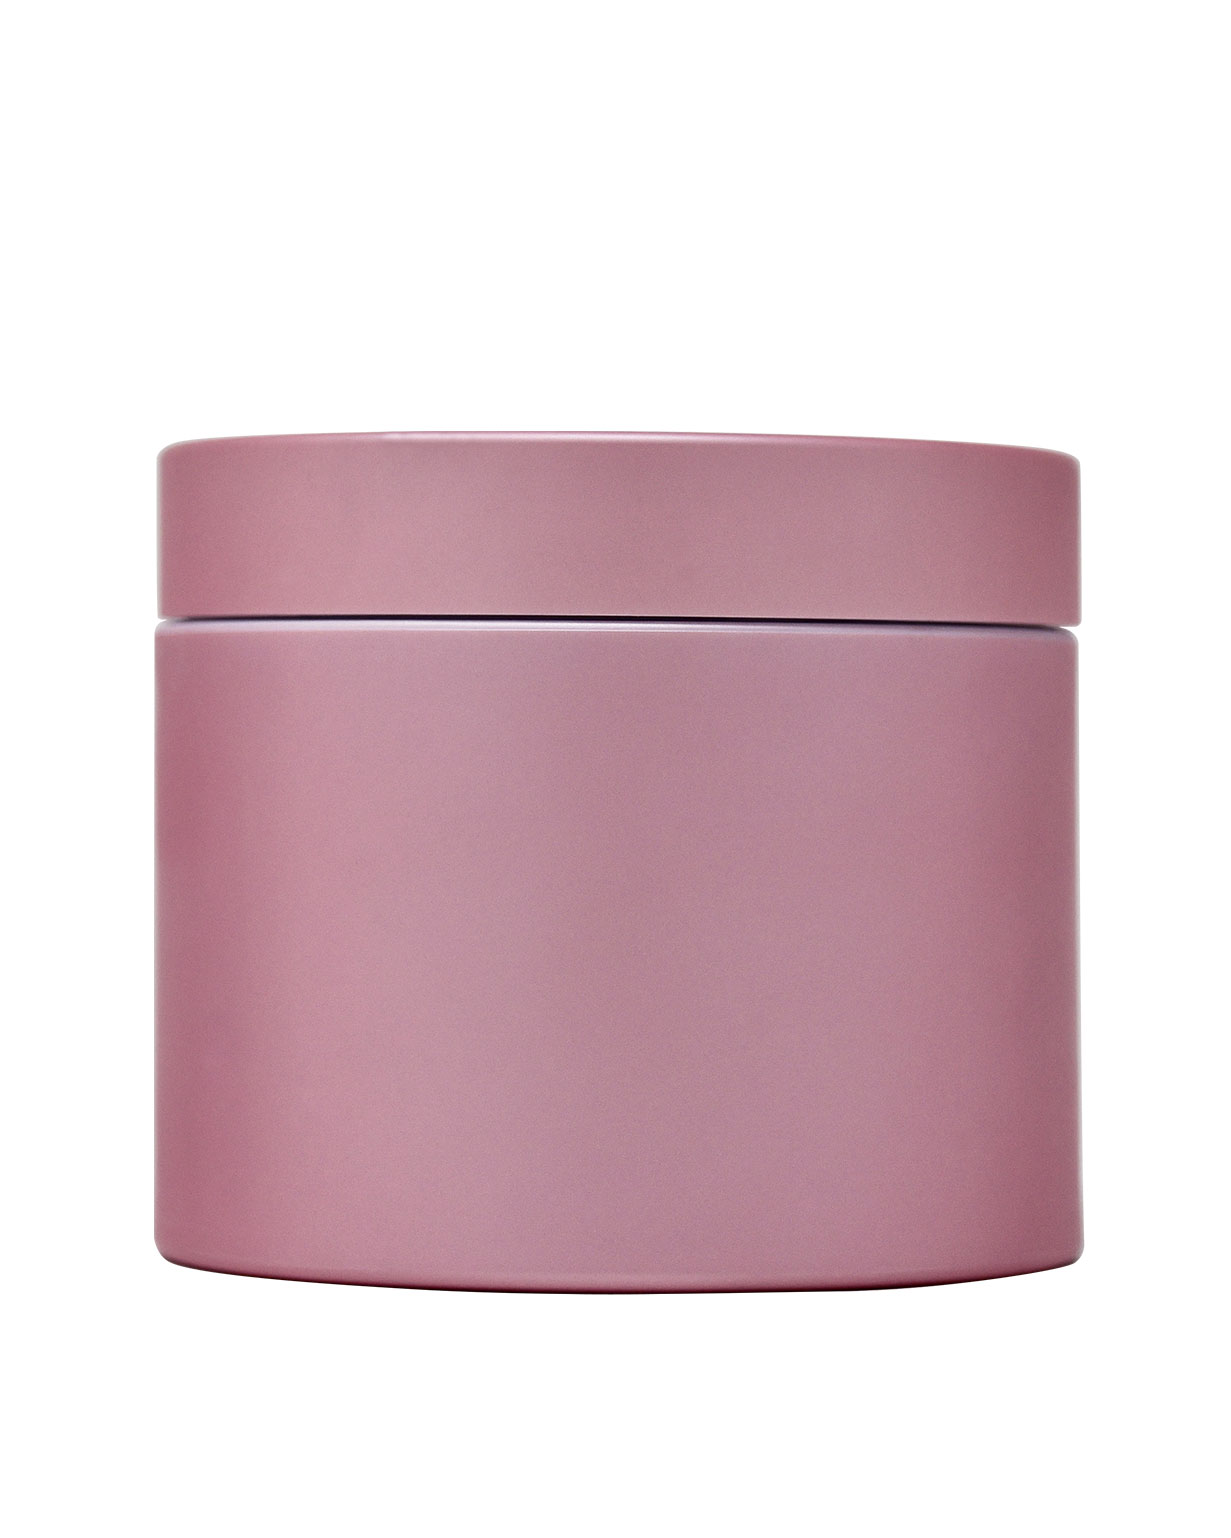 8oz PET double wall pink jar with lid